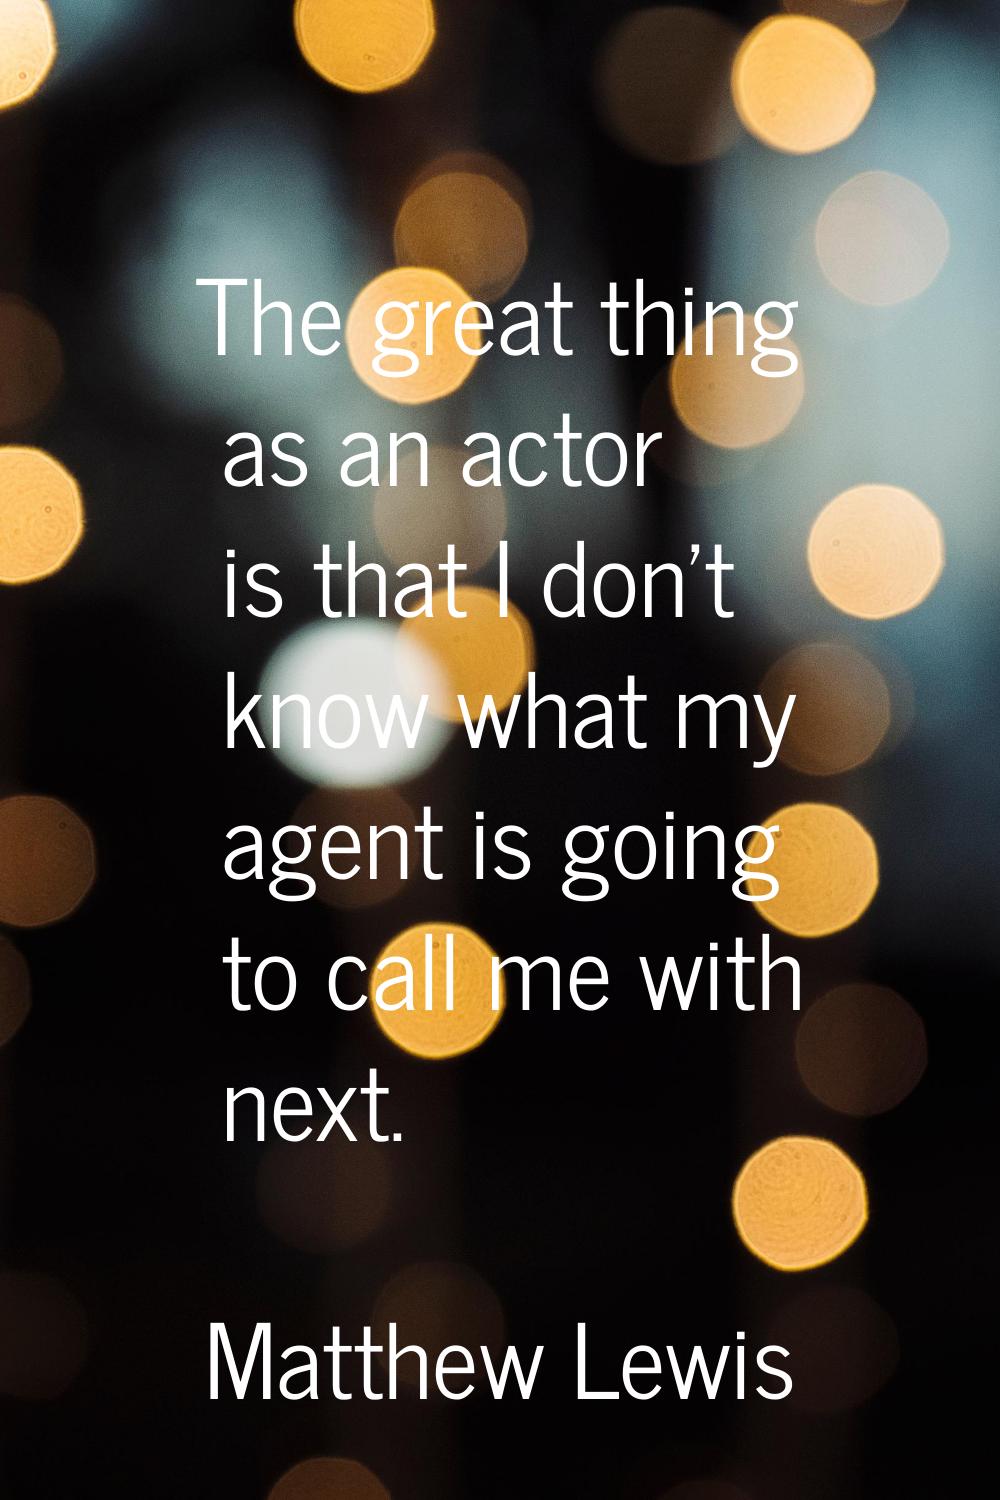 The great thing as an actor is that I don't know what my agent is going to call me with next.